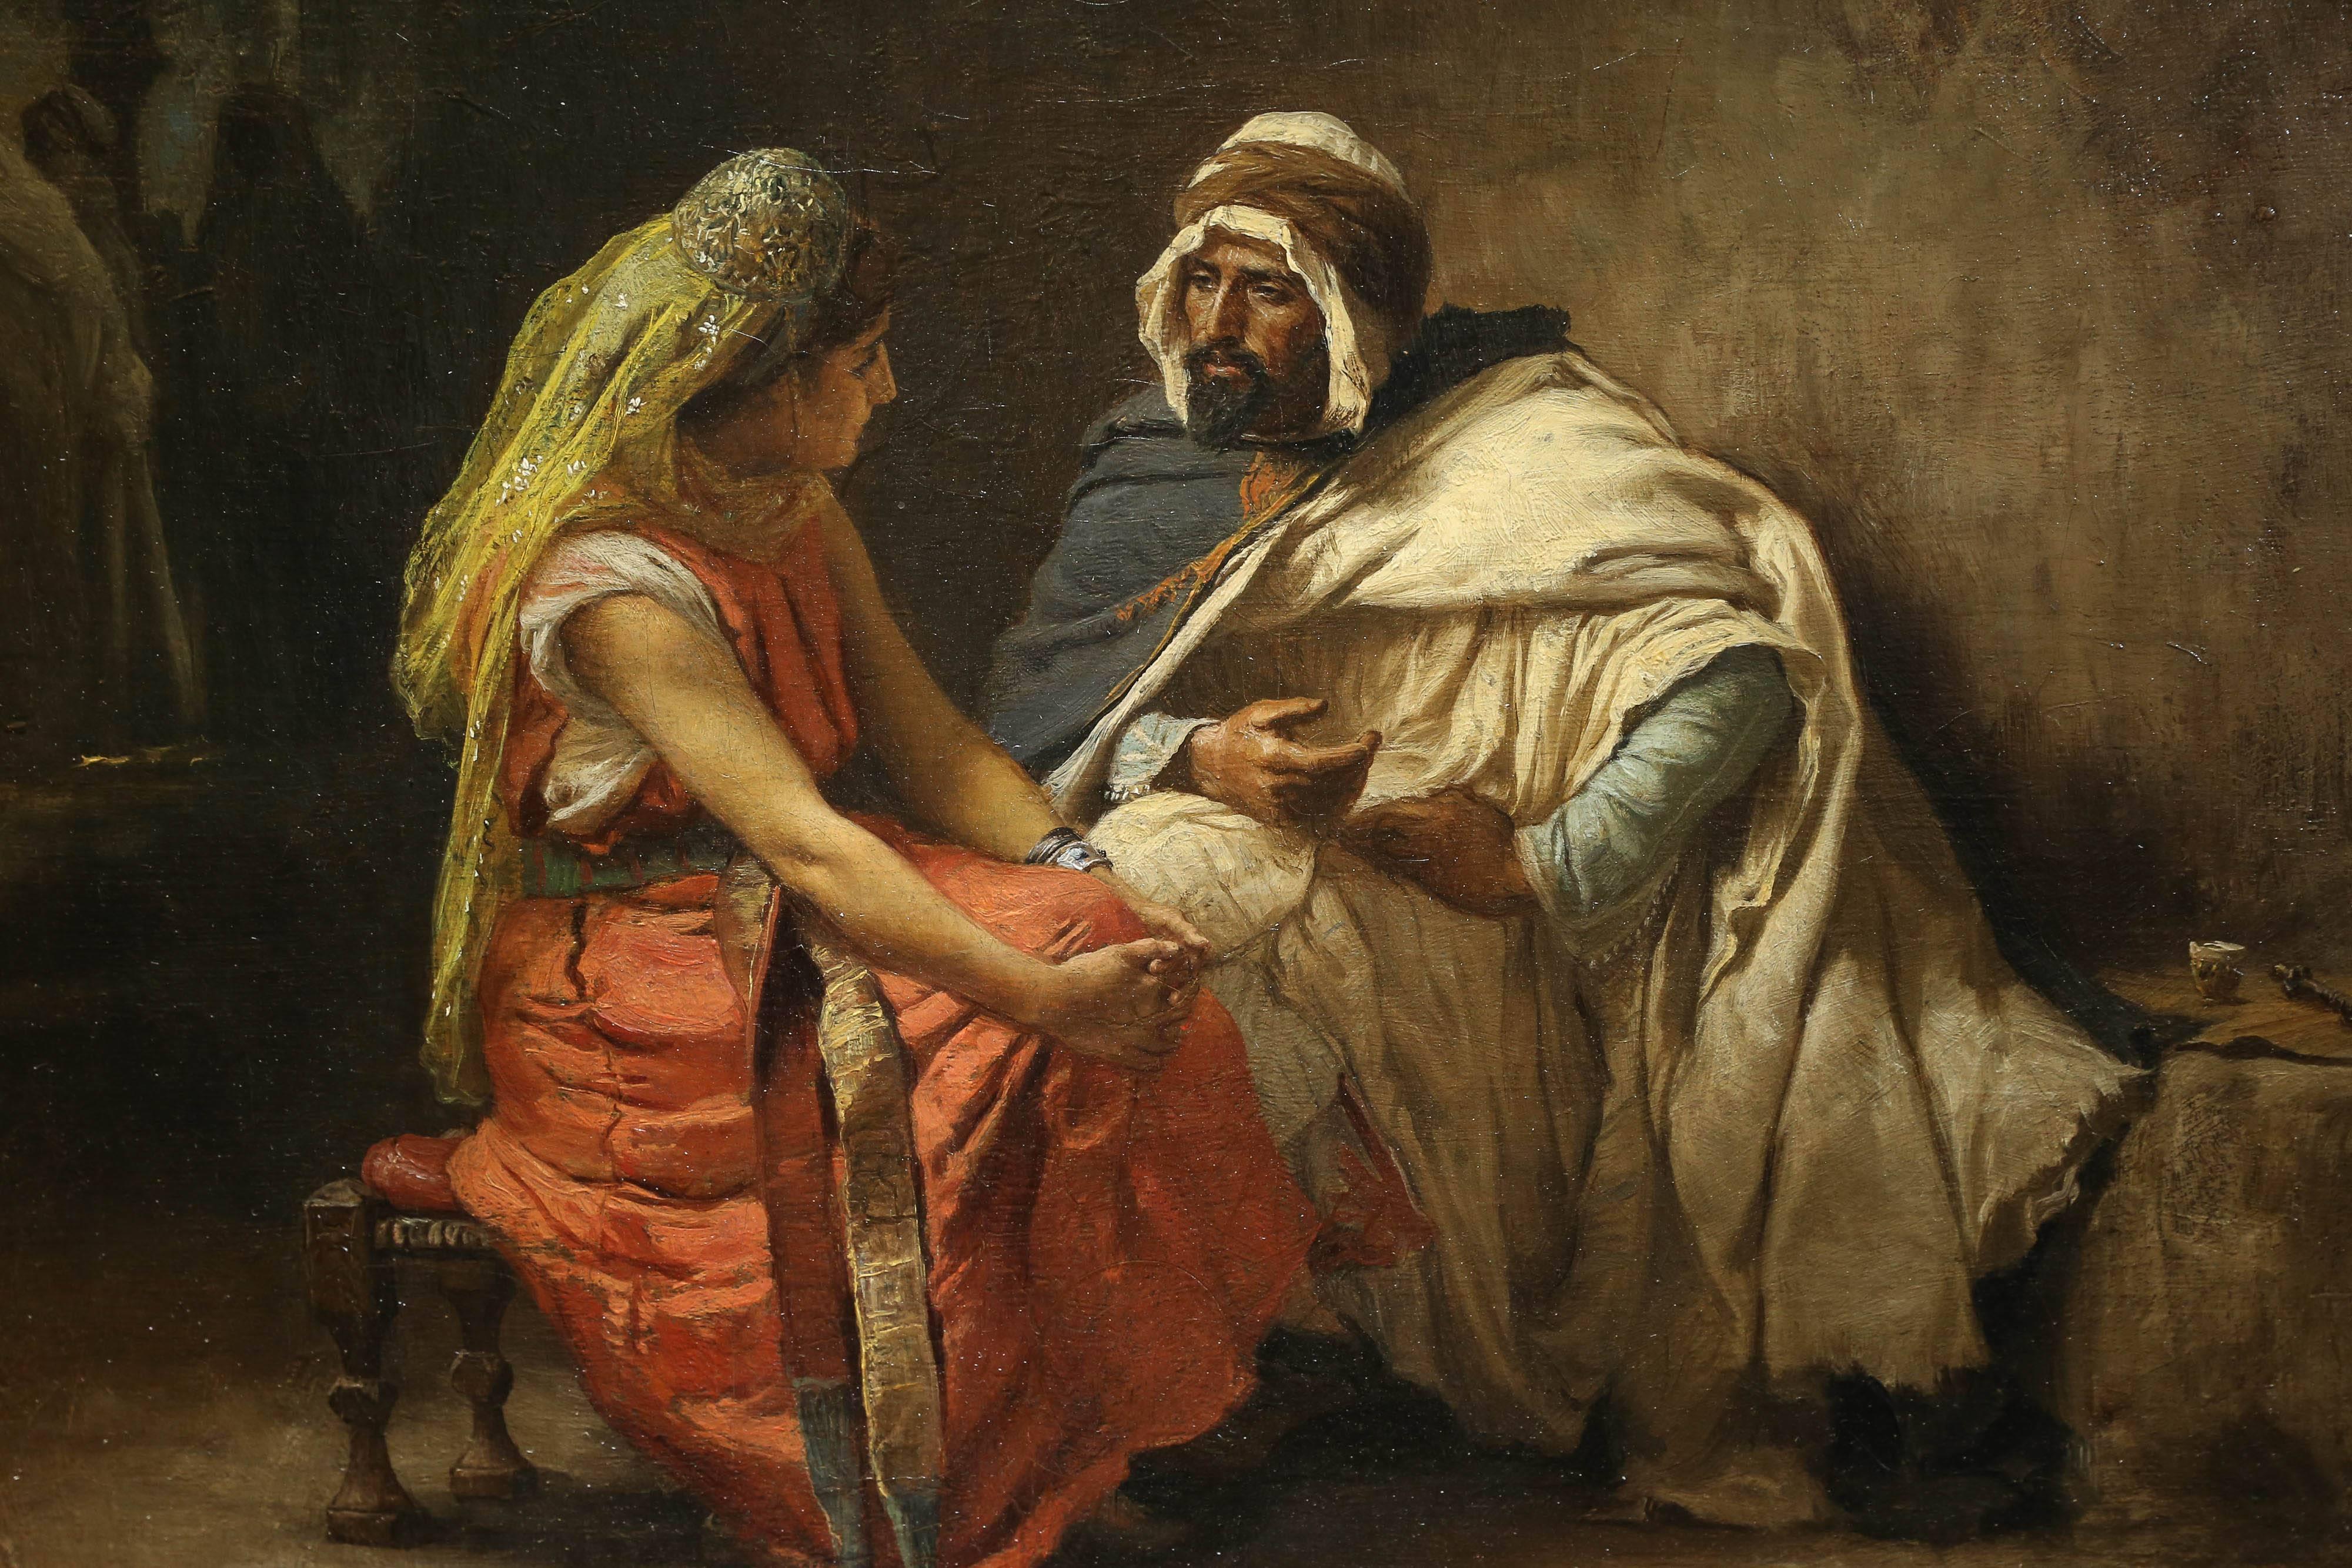 Frederick Bridgman (1847-1928) is one of the most important and recognized American Orientalists. His naturalistic and aesthetic subjects in bright colors will command instantaneous attention and convey delight to the viewer. Although Paris was his